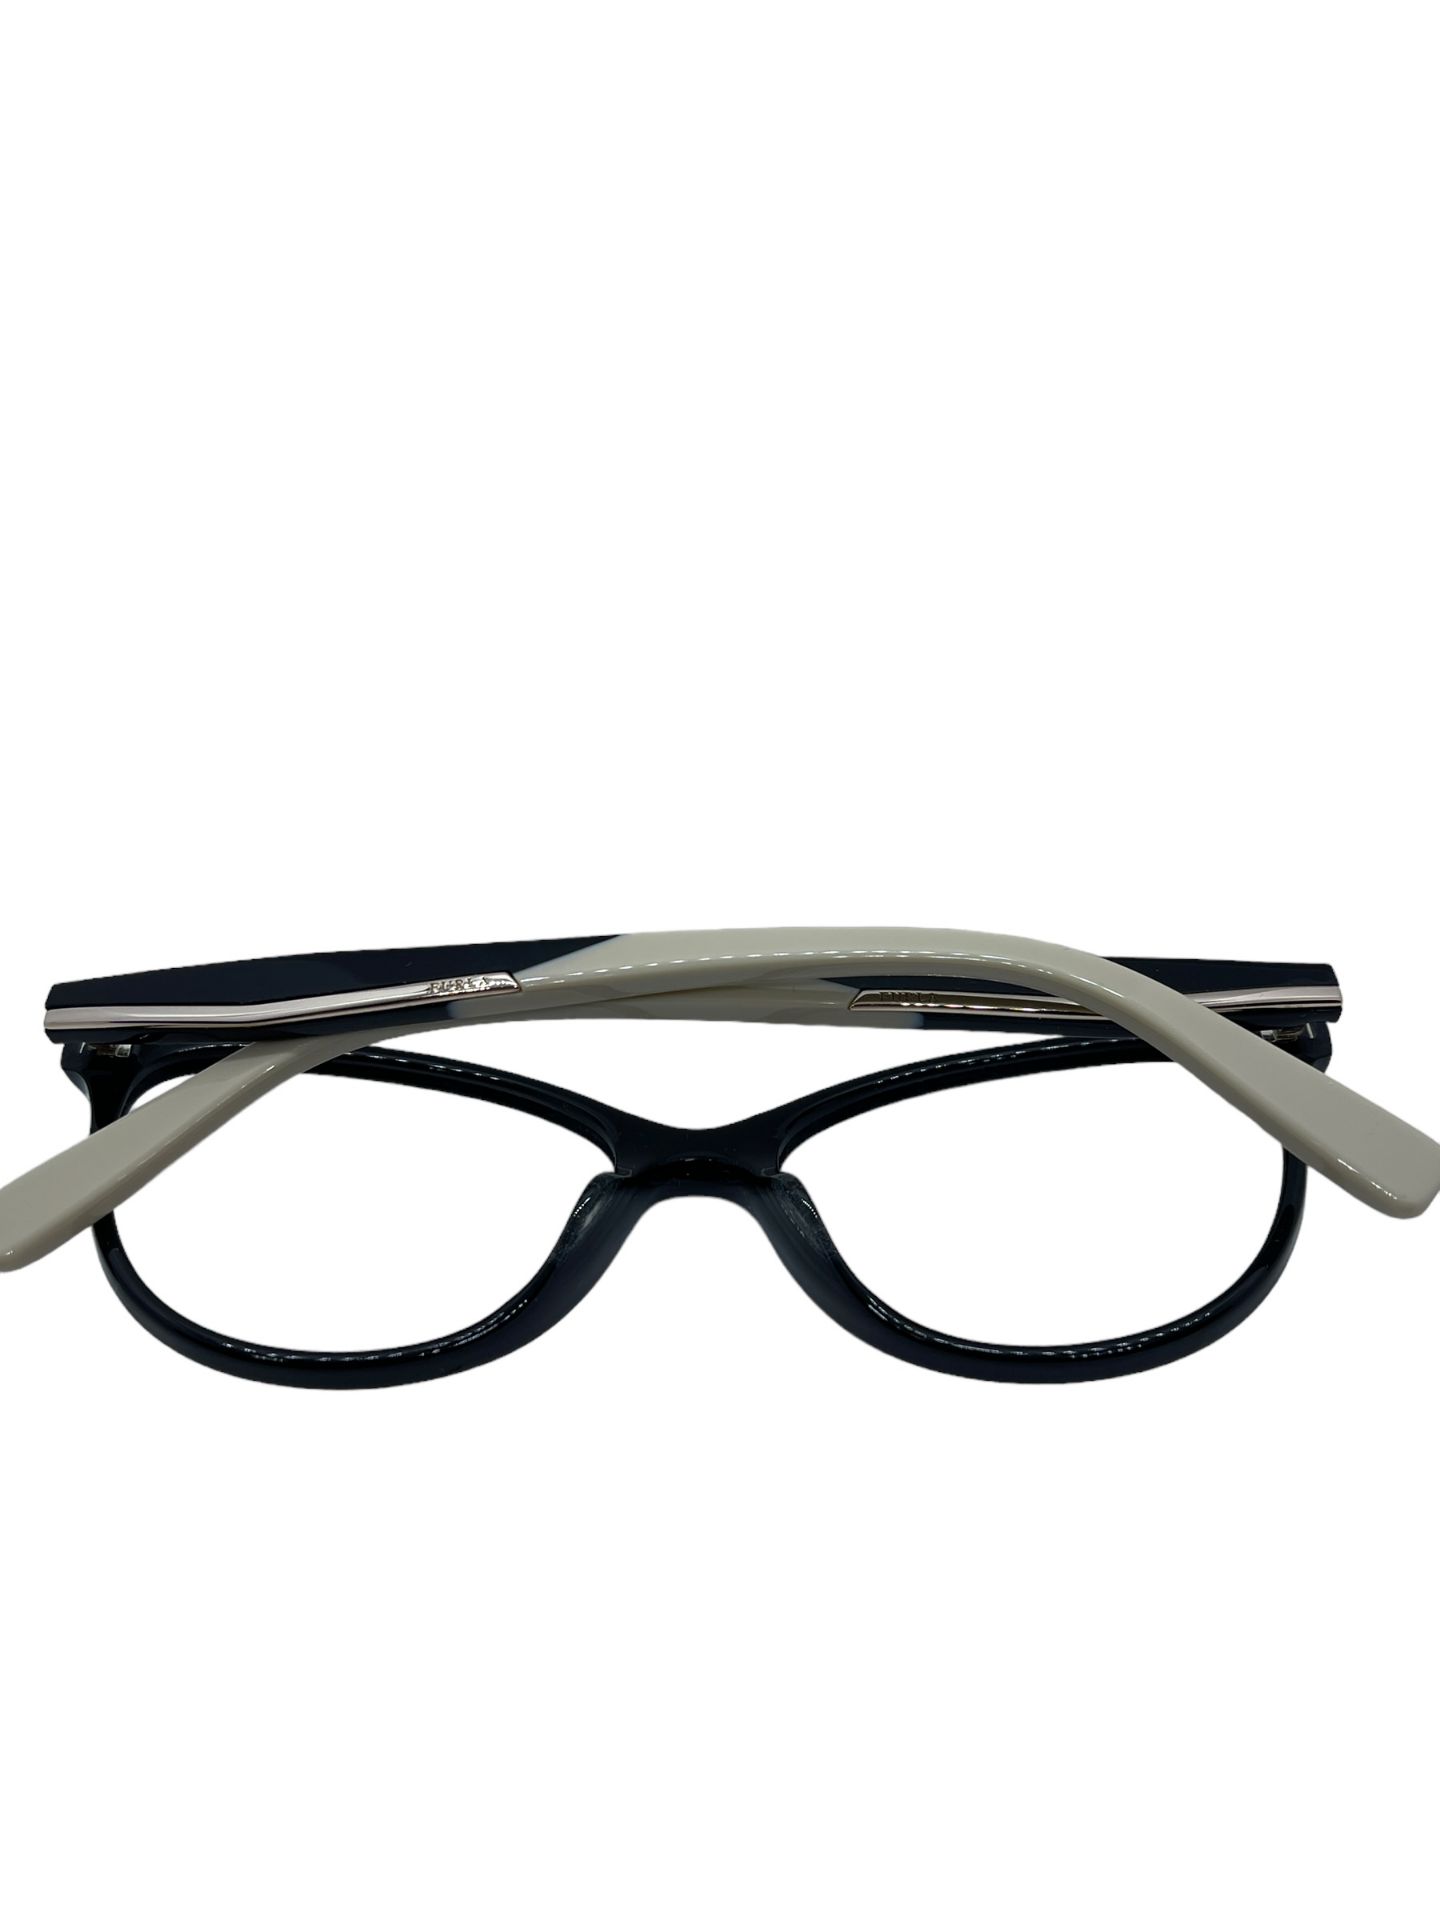 ladies fala Spectacles - Image 3 of 4